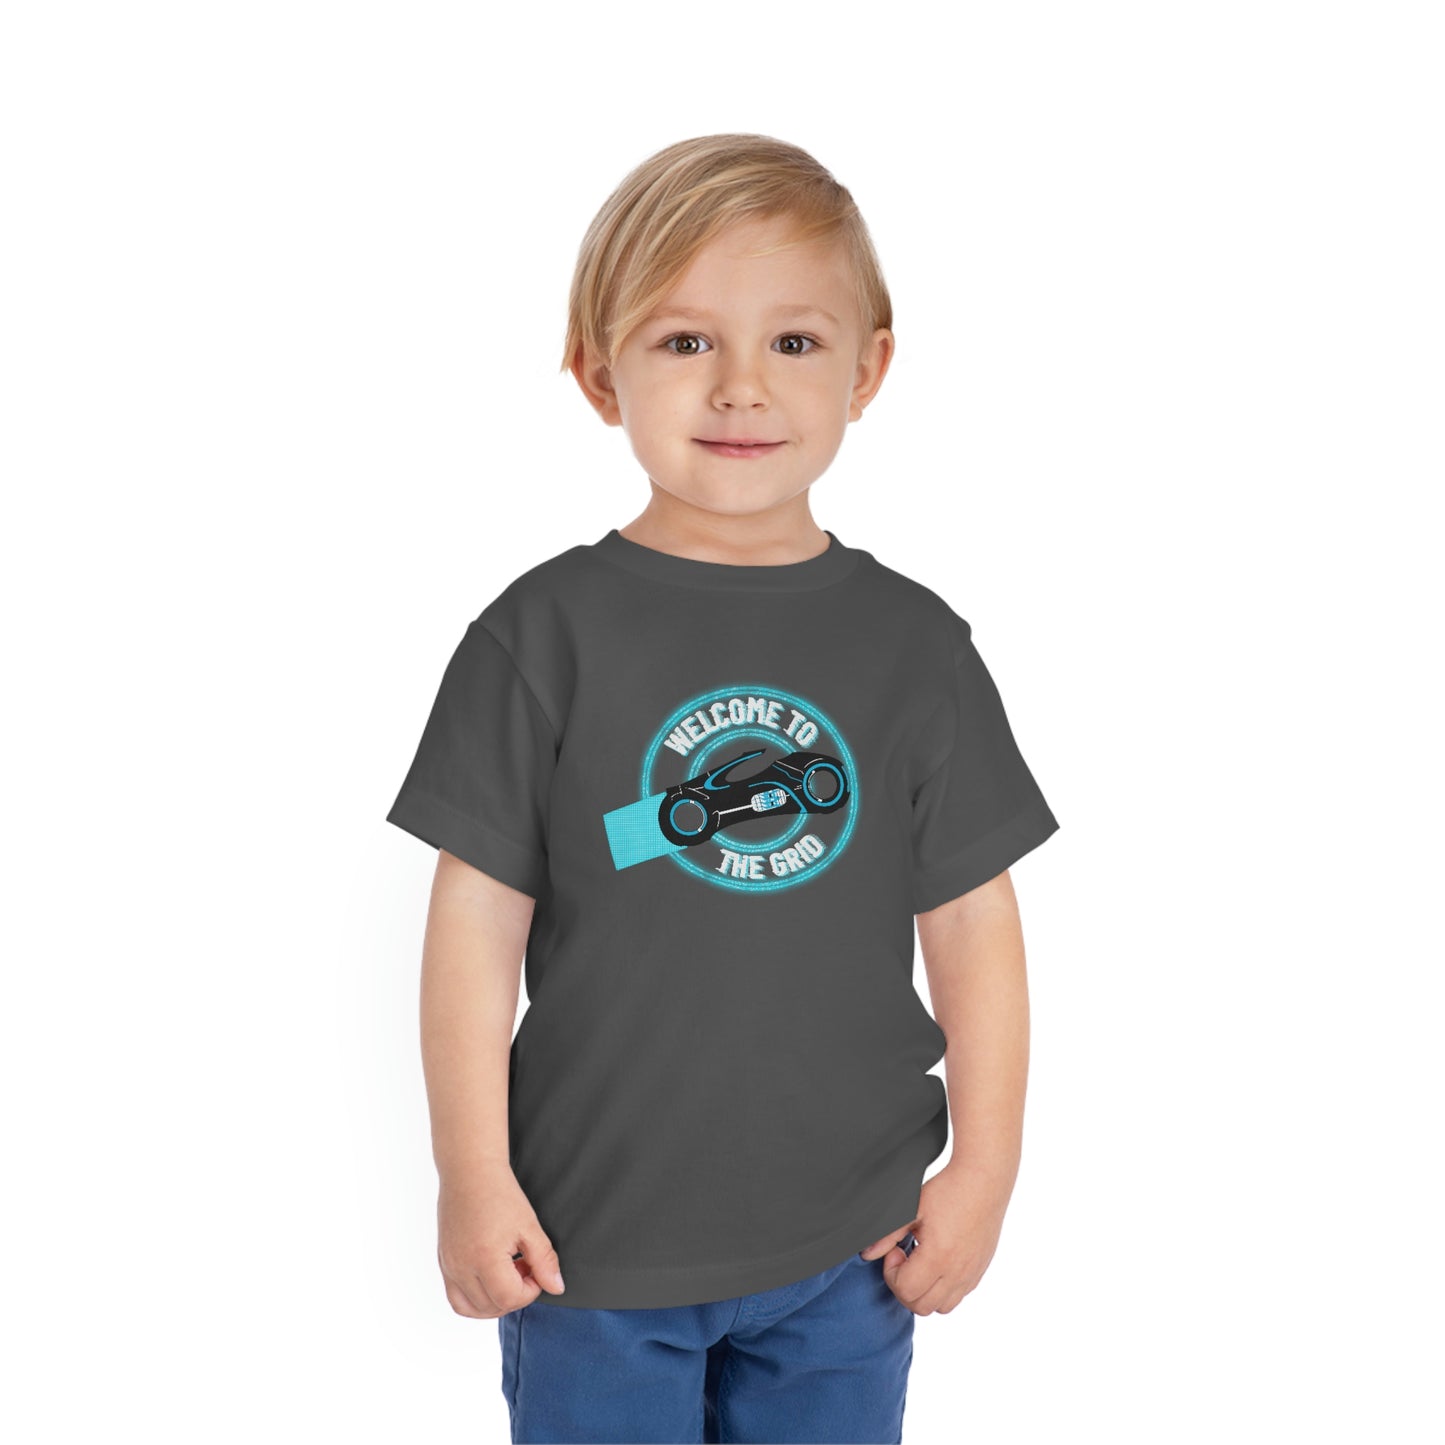 Welcome To The Grid TODDLER Short Sleeve Tee